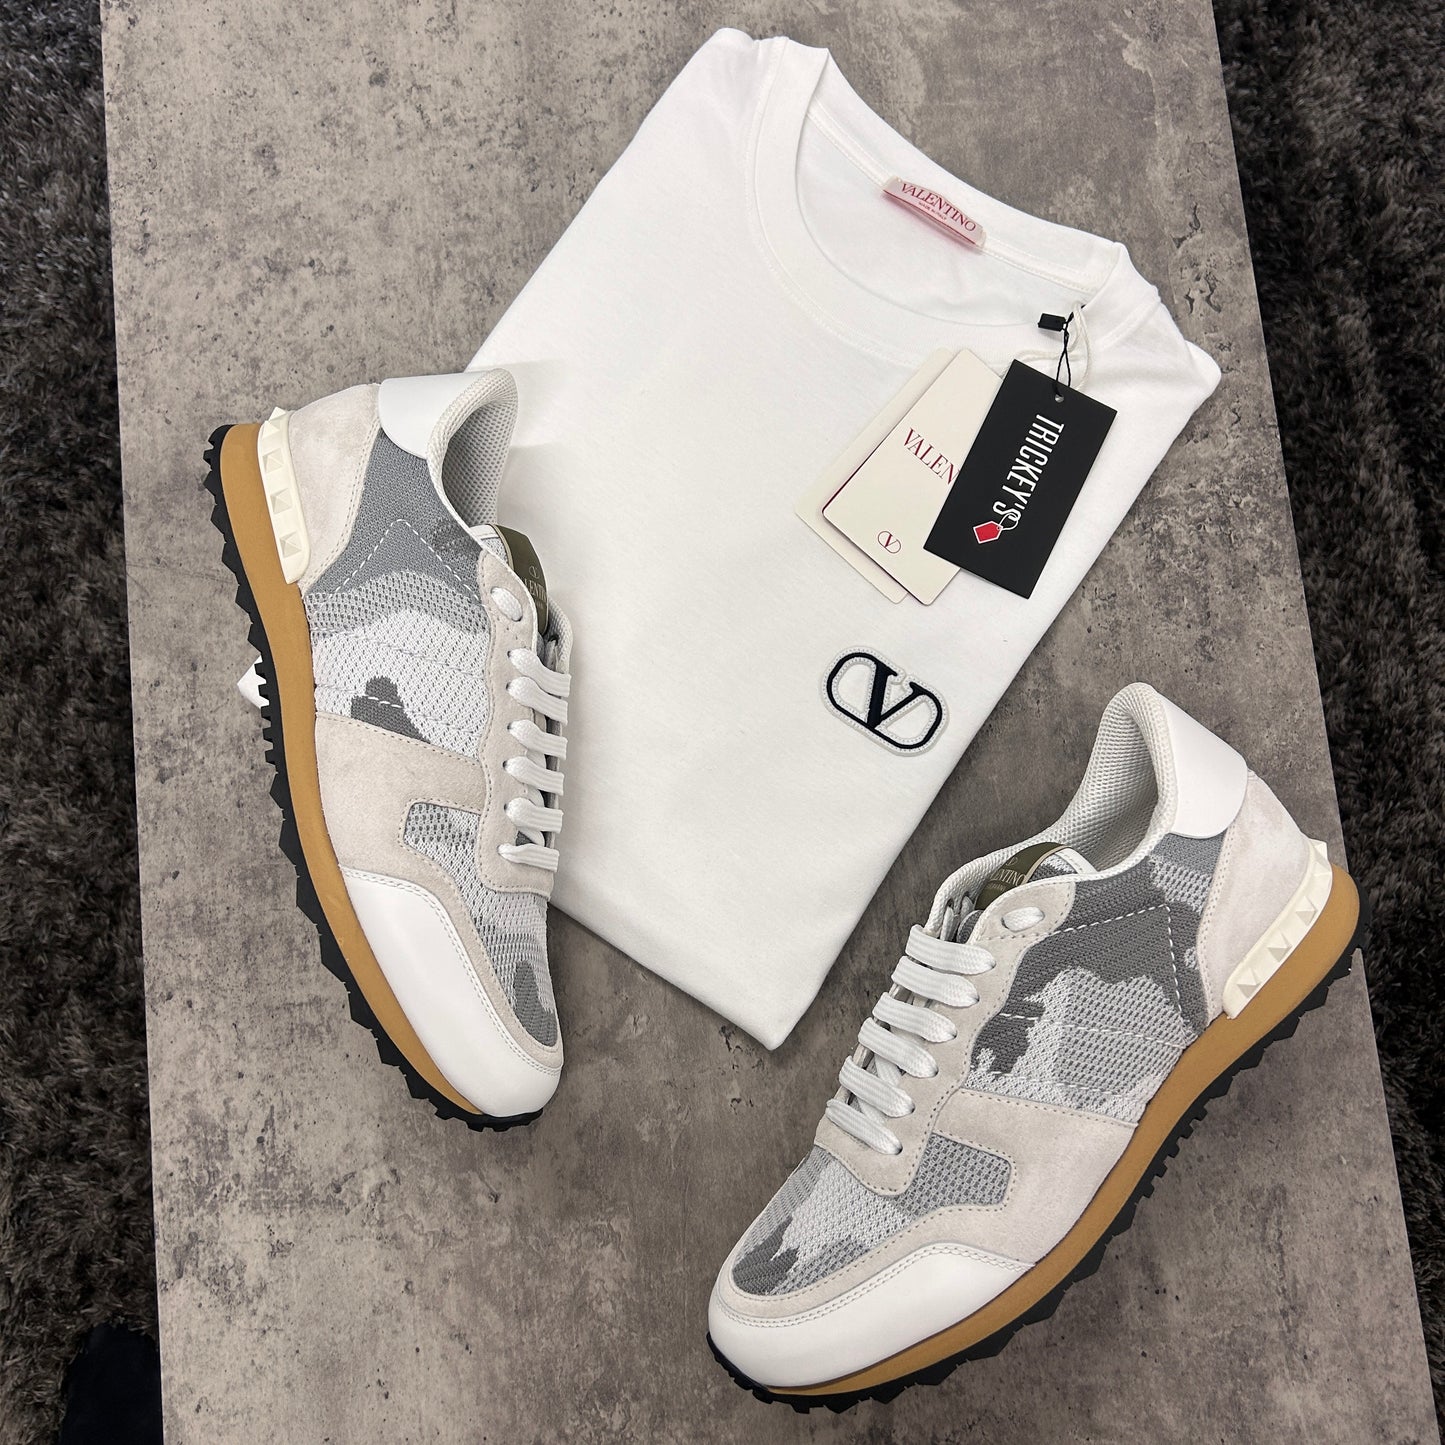 Valentino T-shirt & Rockrunner Set - All Sizes Available